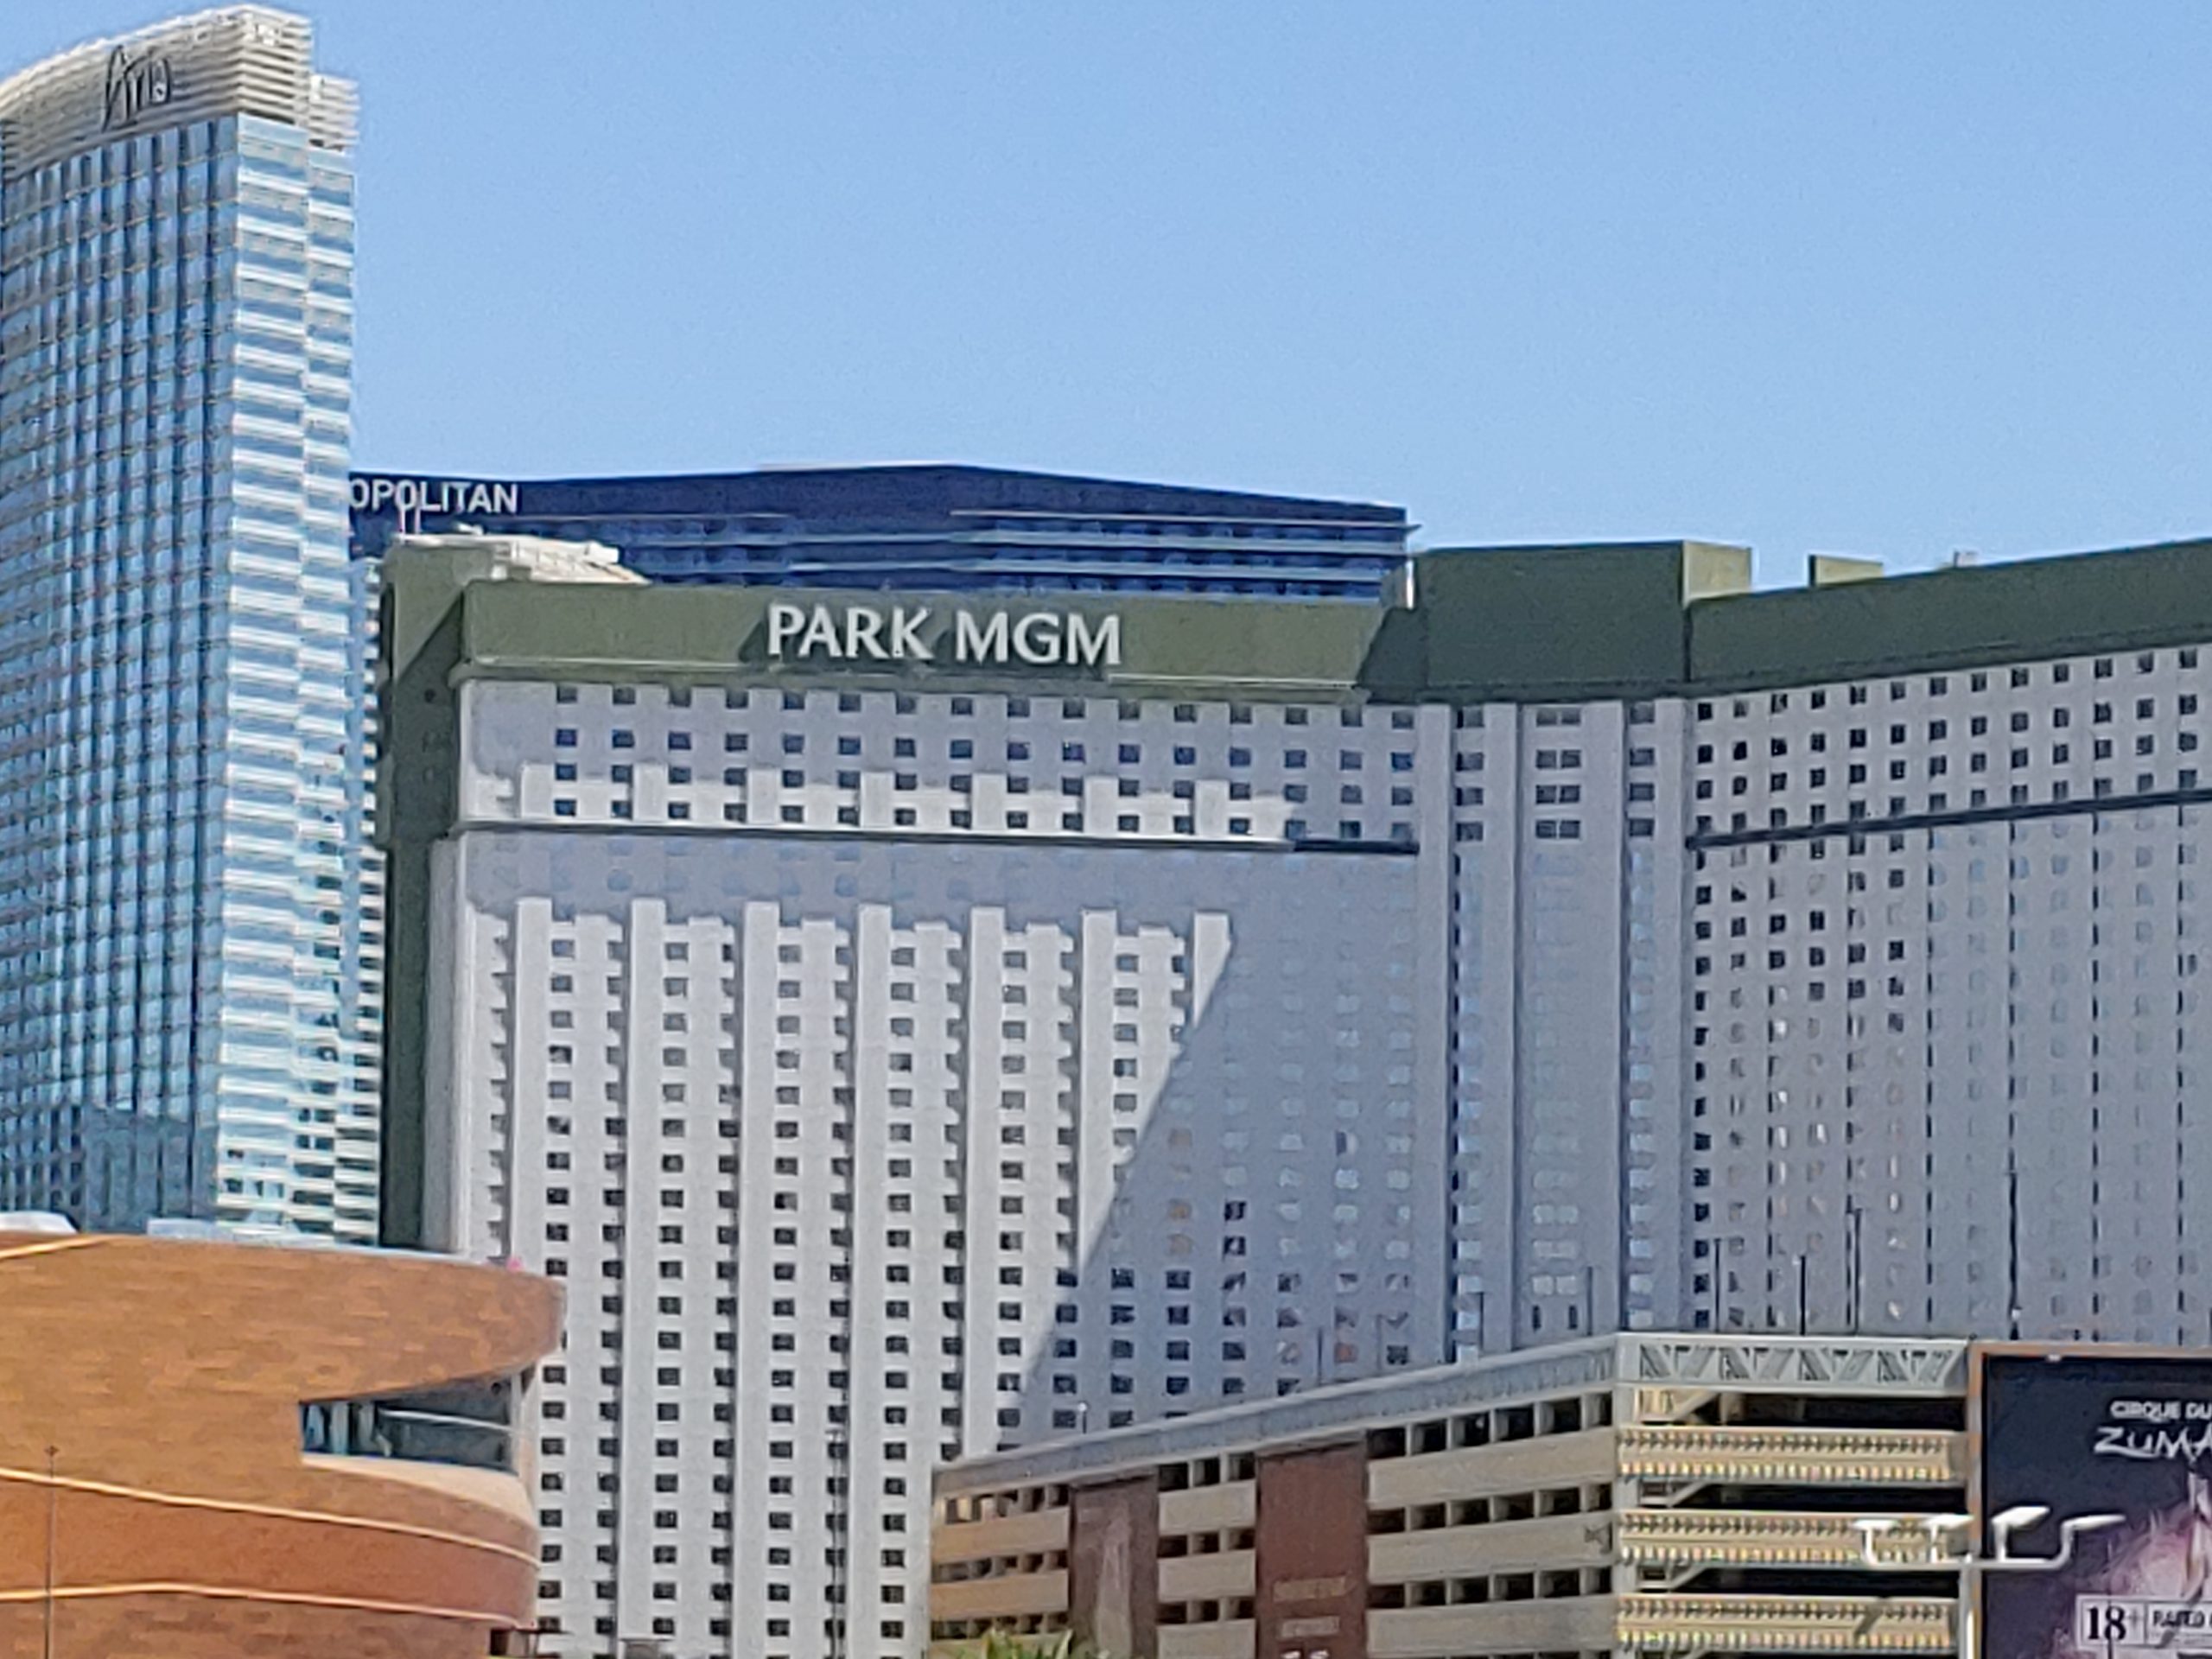 MGM Grand, Bellagio, and New York-New York reopen on the Las Vegas